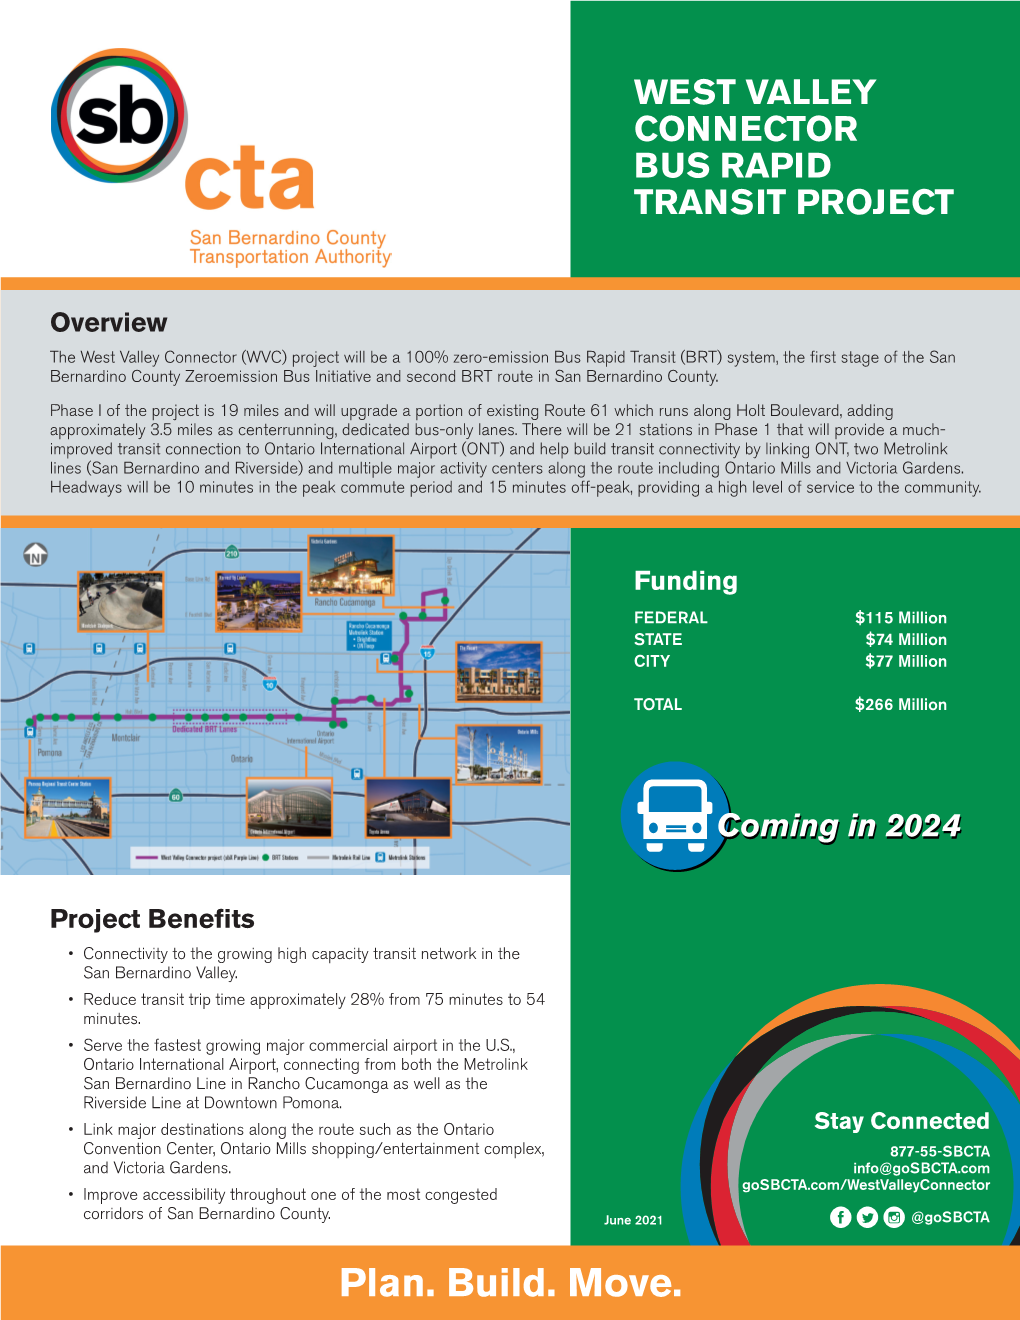 West Valley Connector Bus Rapid Transit Project